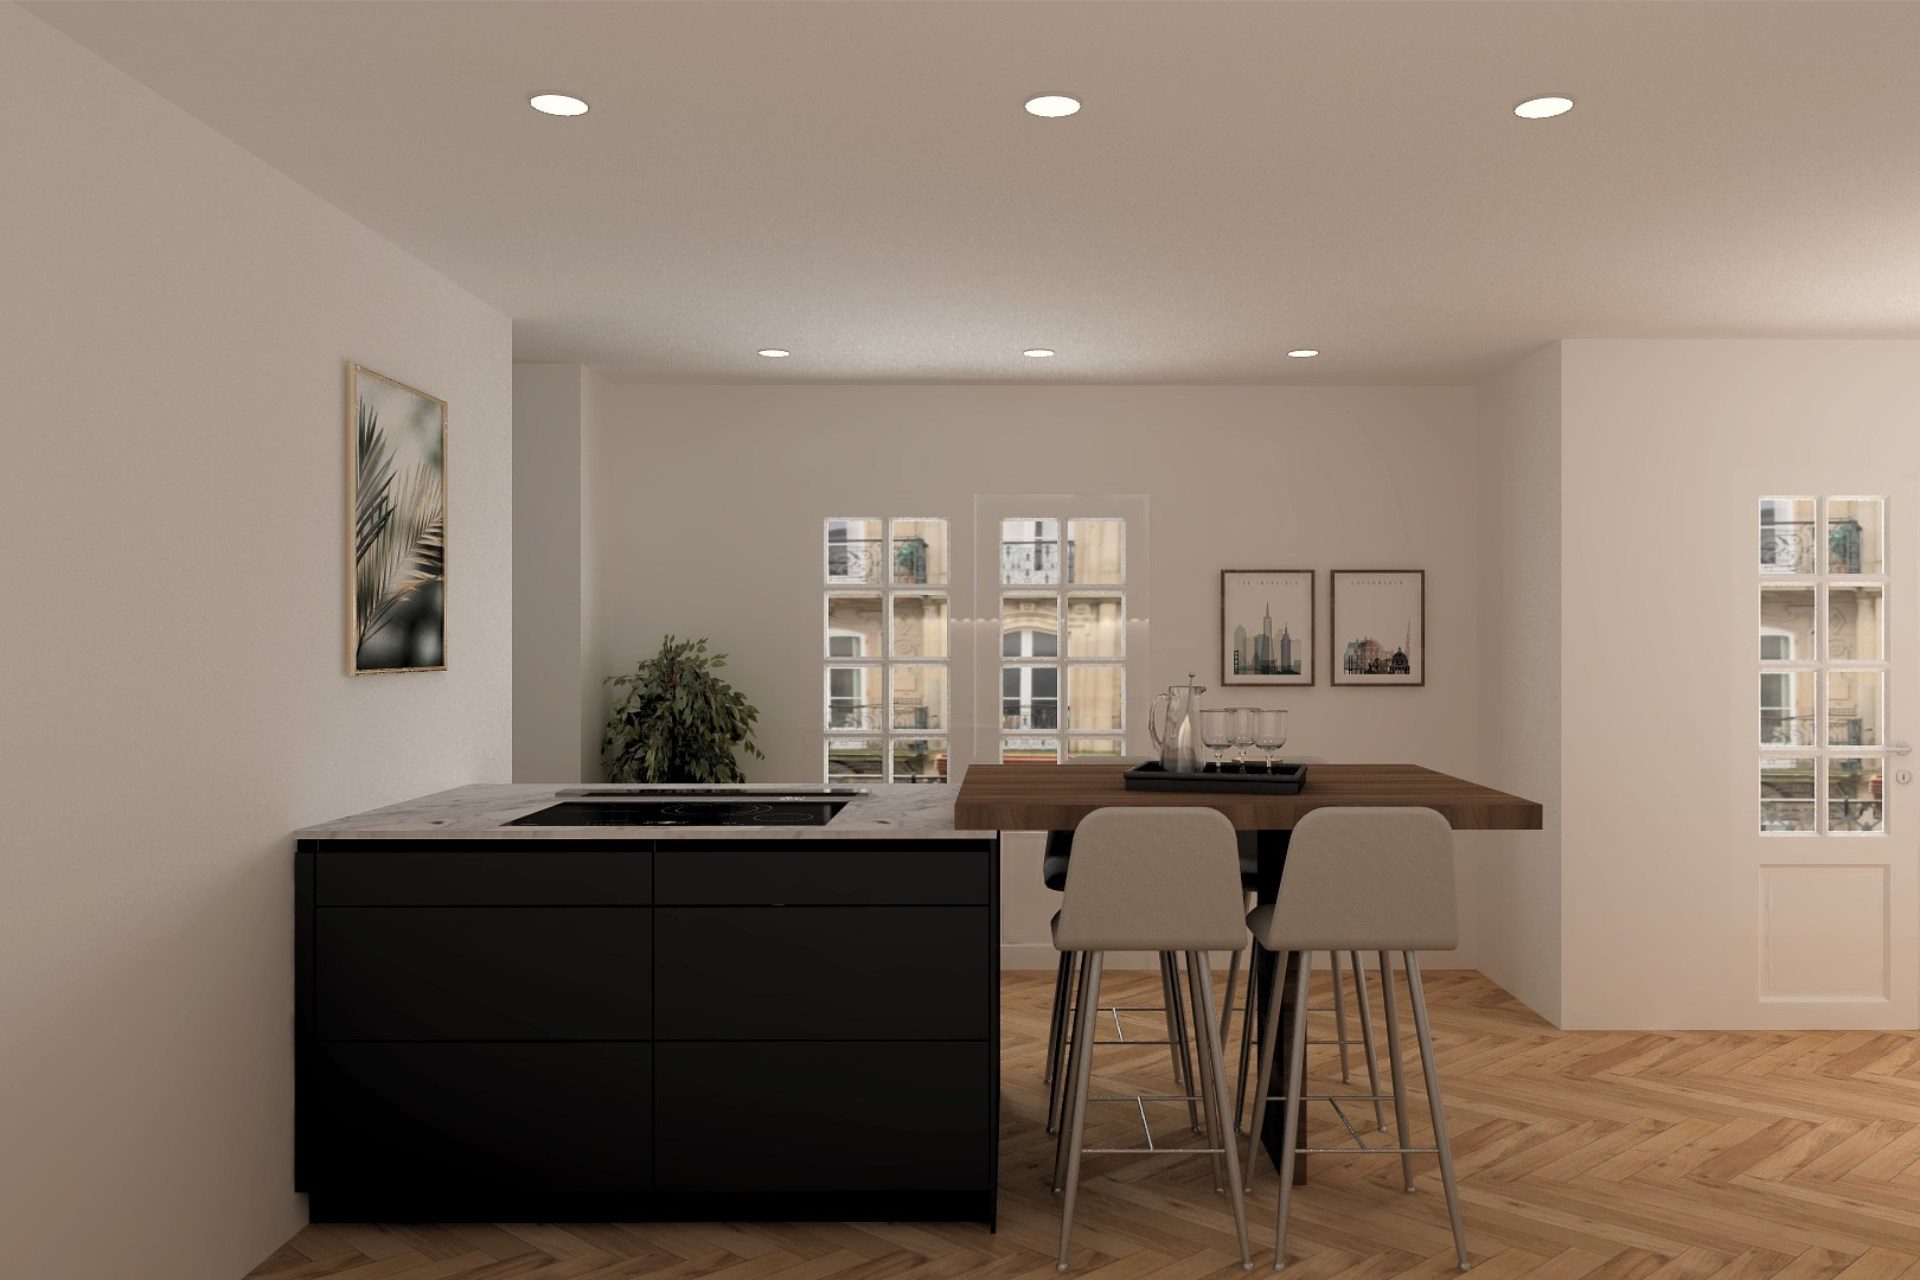 Image of black central island with white worktop extended by a wooden high table and grey fabric chairs